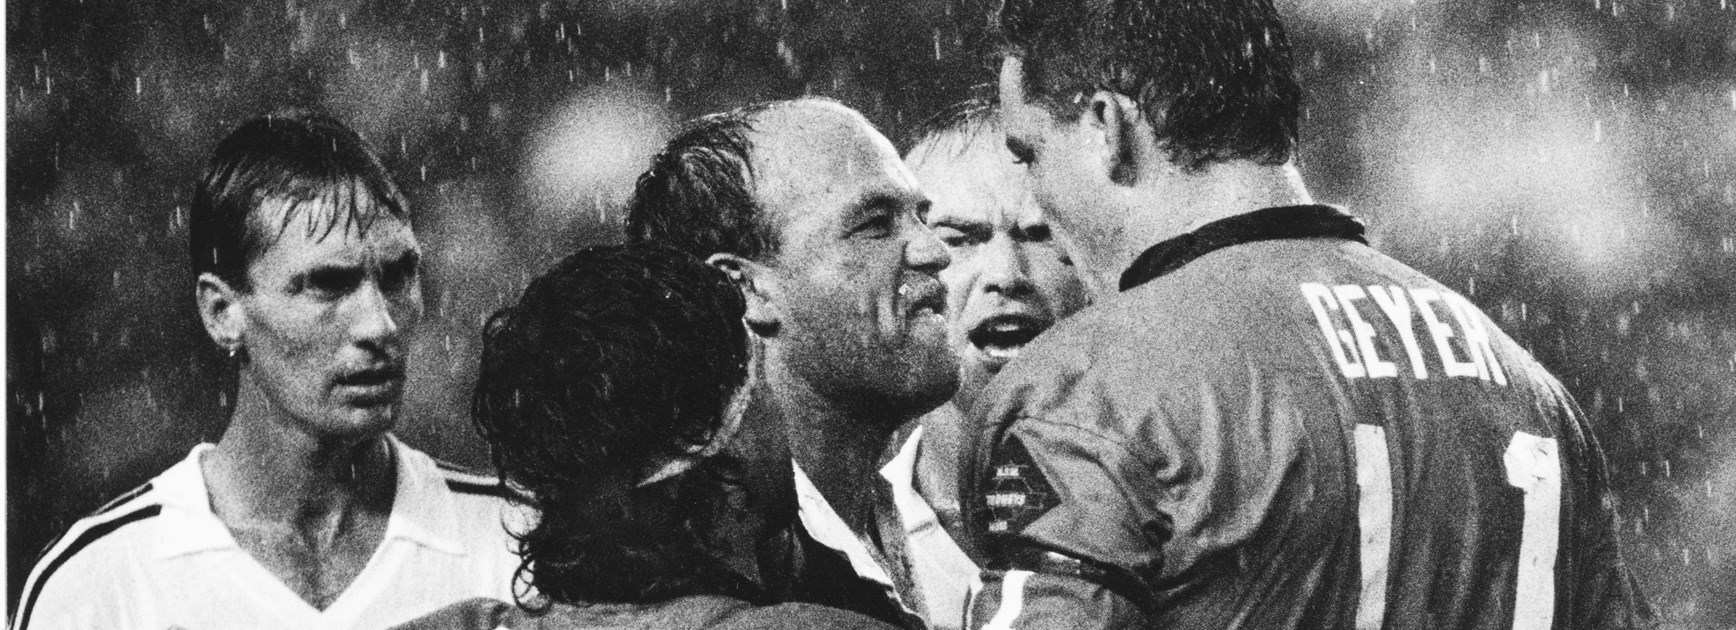 How Maroons went after Geyer before and after 1991 Lewis stoush